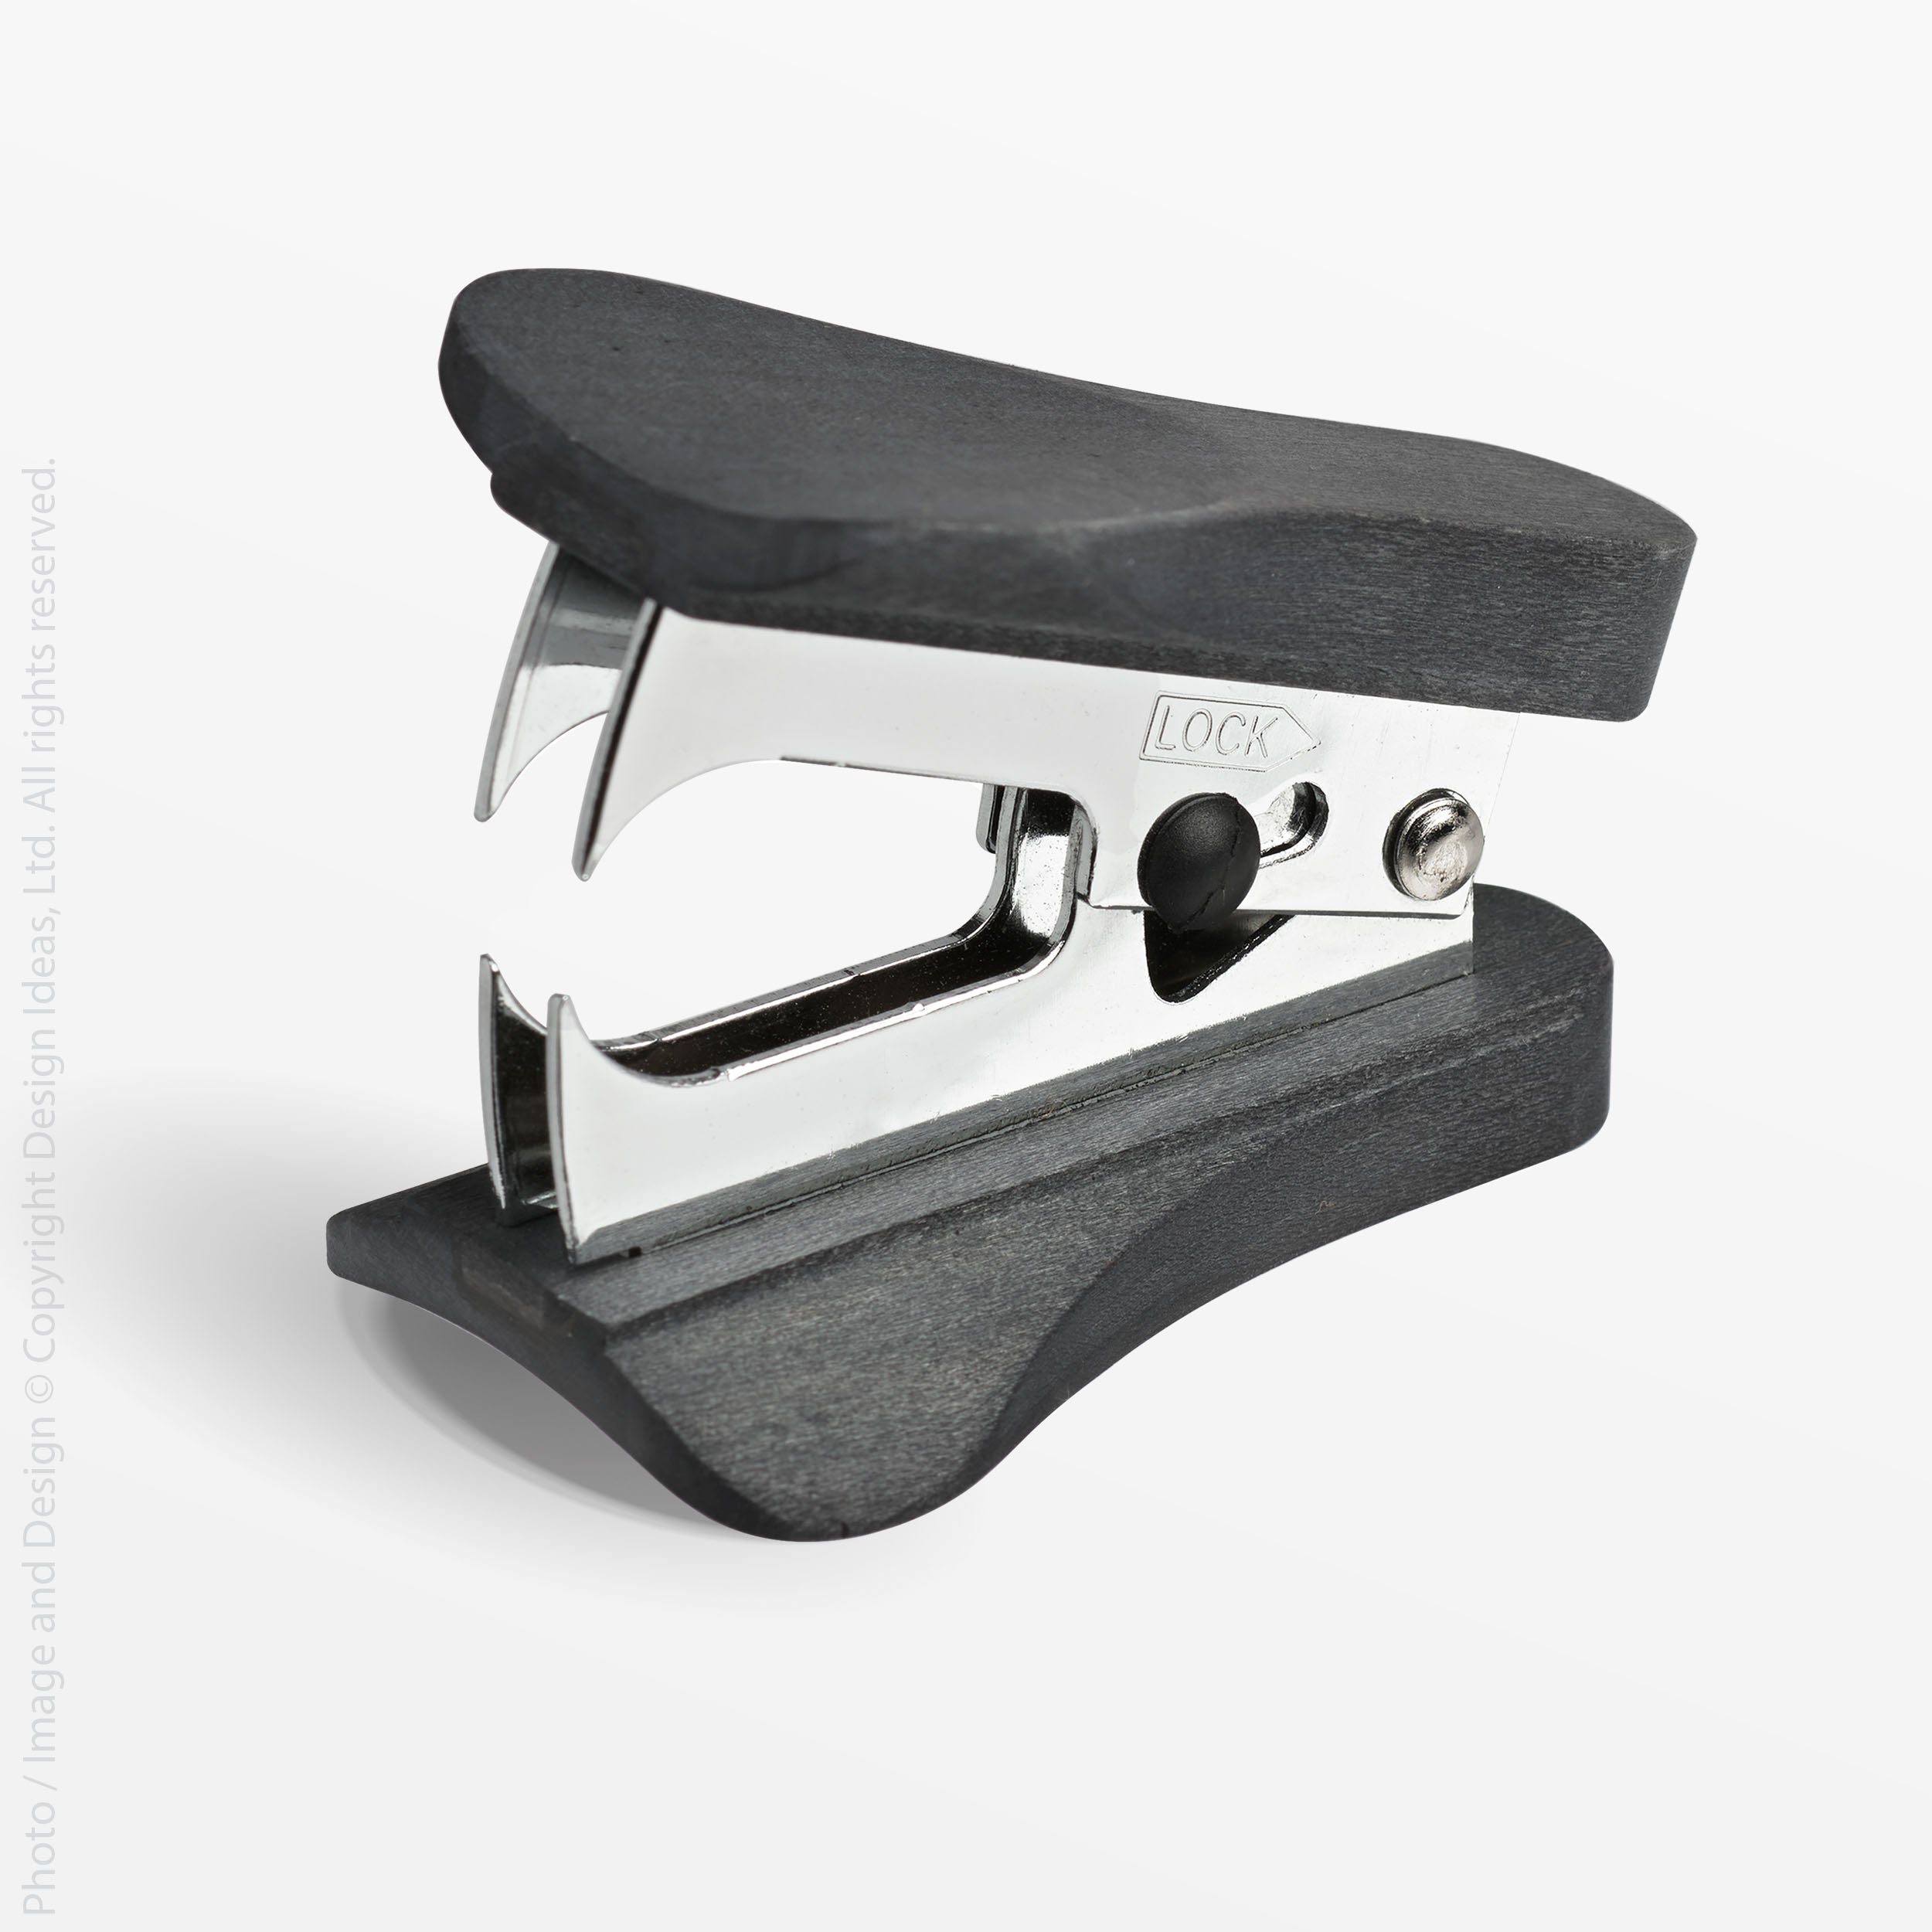 Cokala™ staple remover - Black | Image 2 | Premium Desk Accessory from the Cokala collection | made with Sycamore for long lasting use | texxture